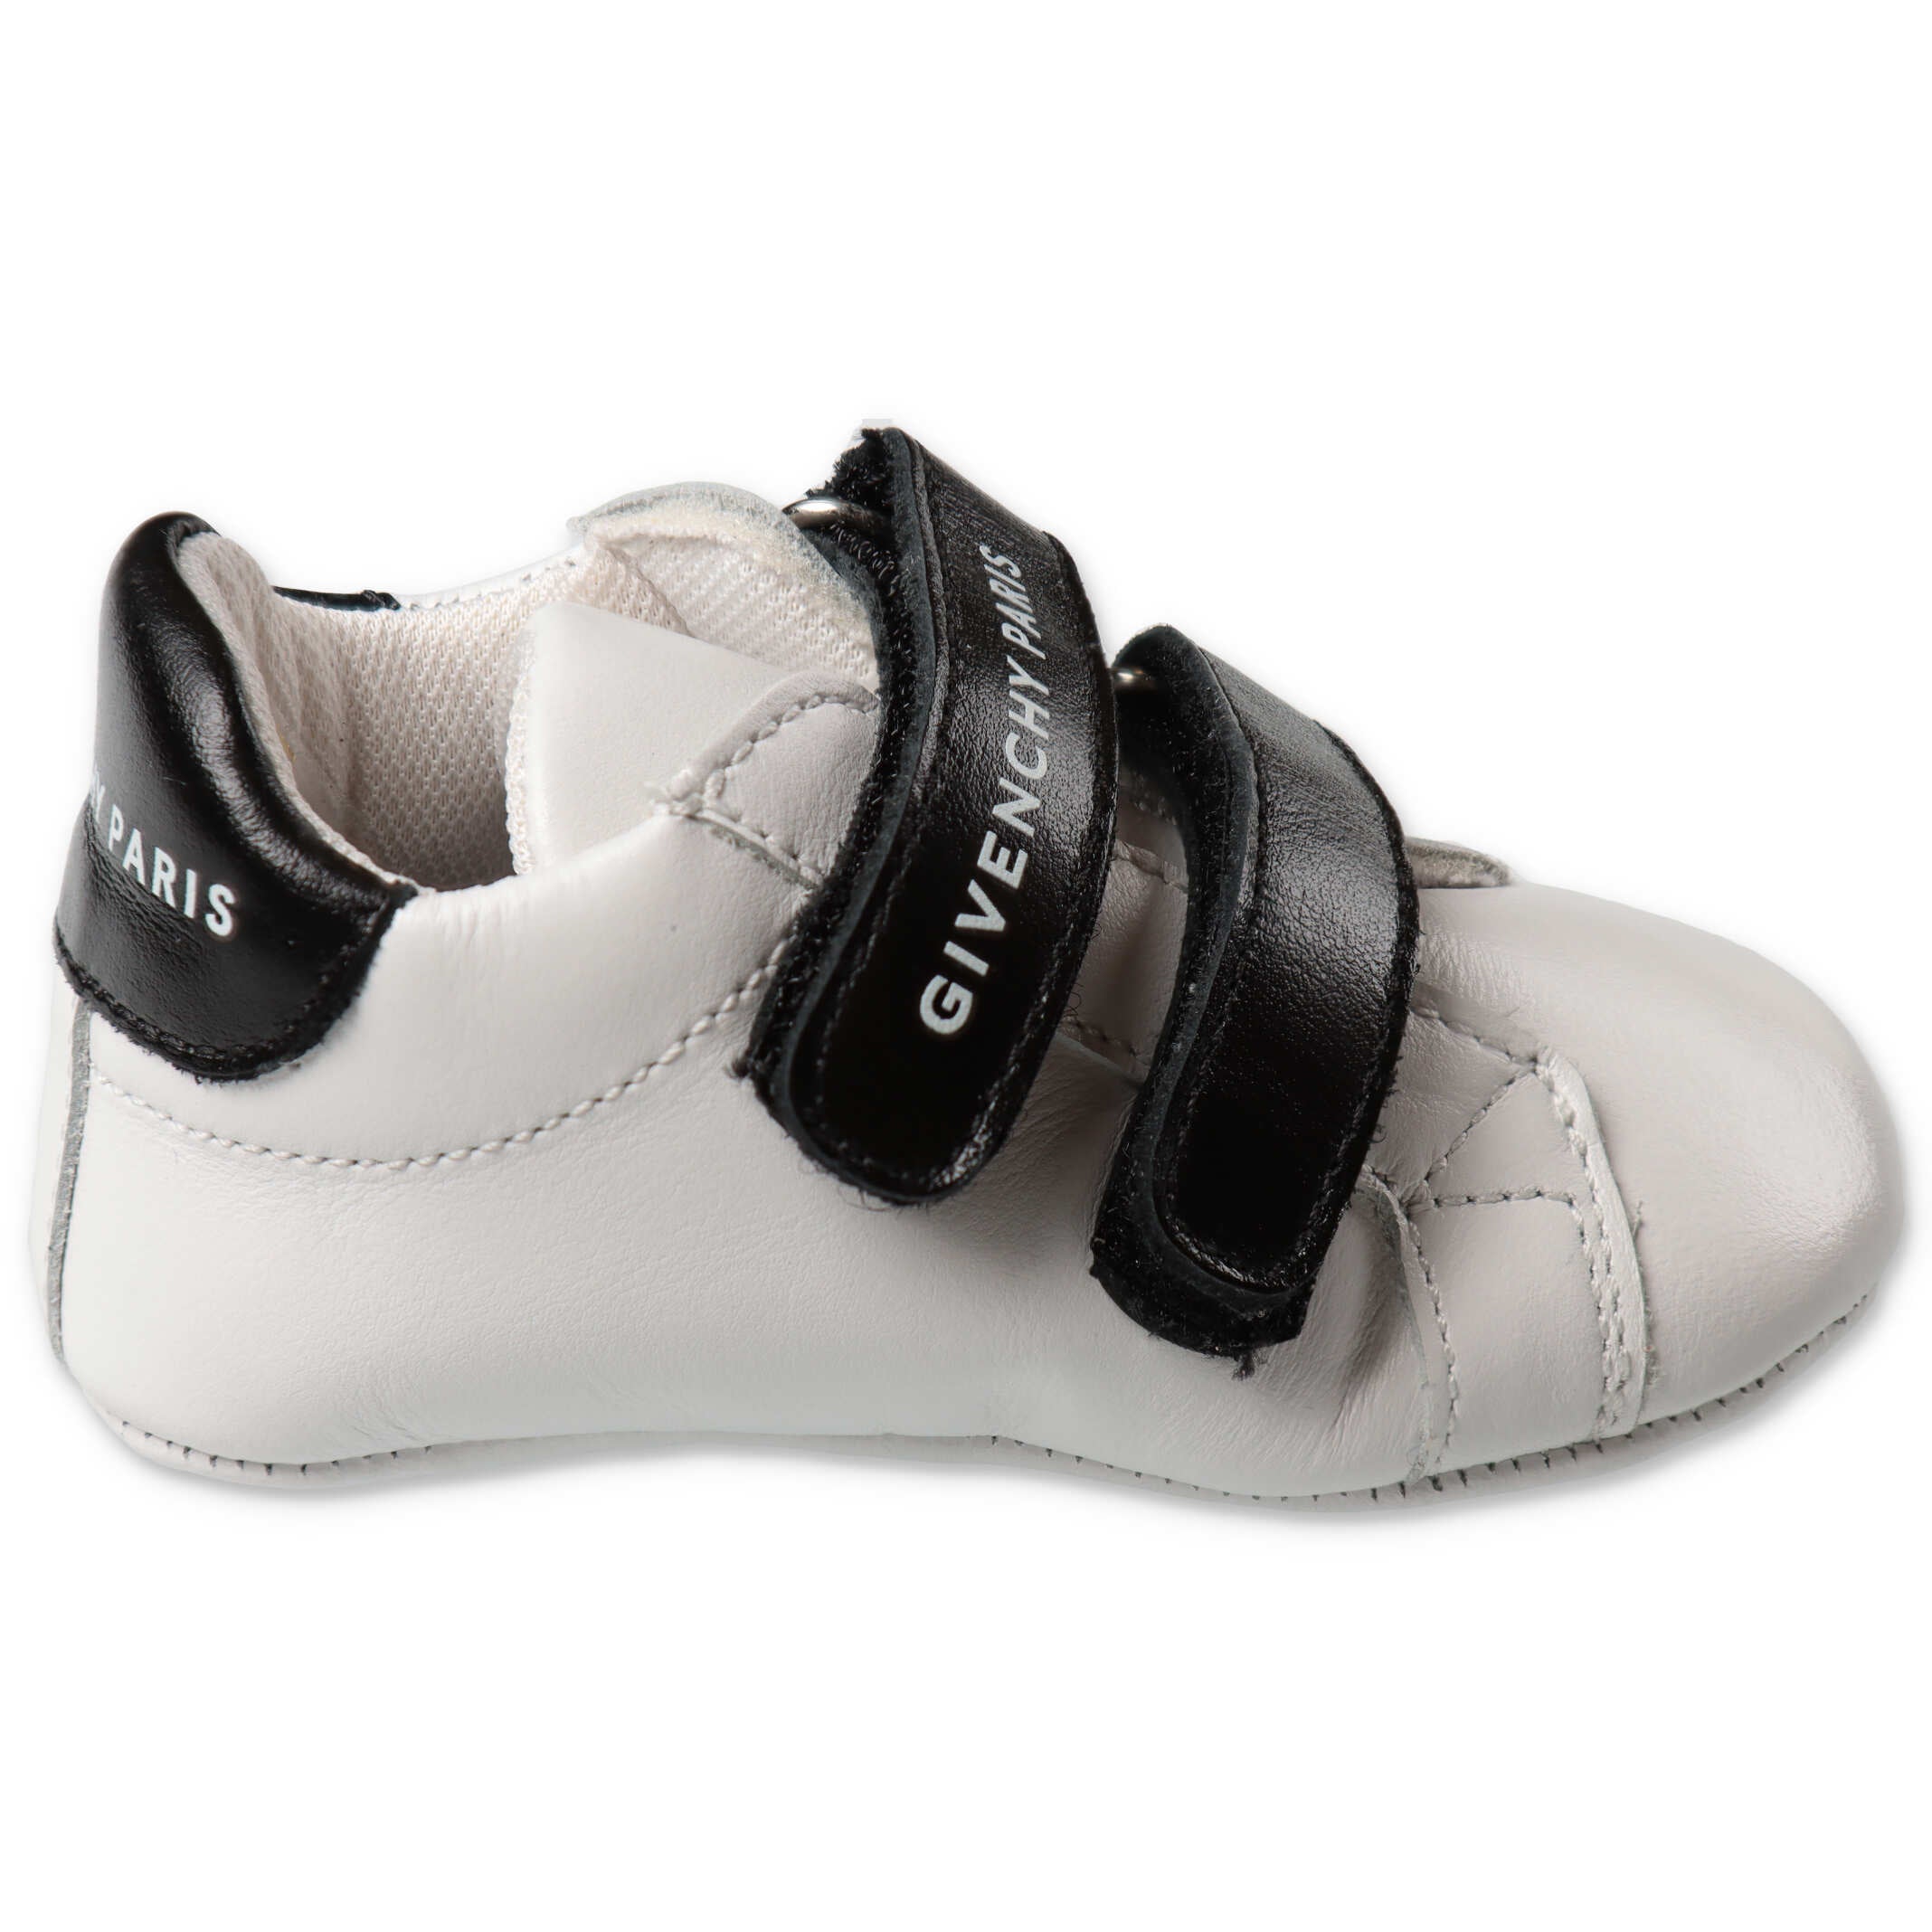 GIVENCHY GIVENCHY KIDS LOGO PRINT SNEAKERS